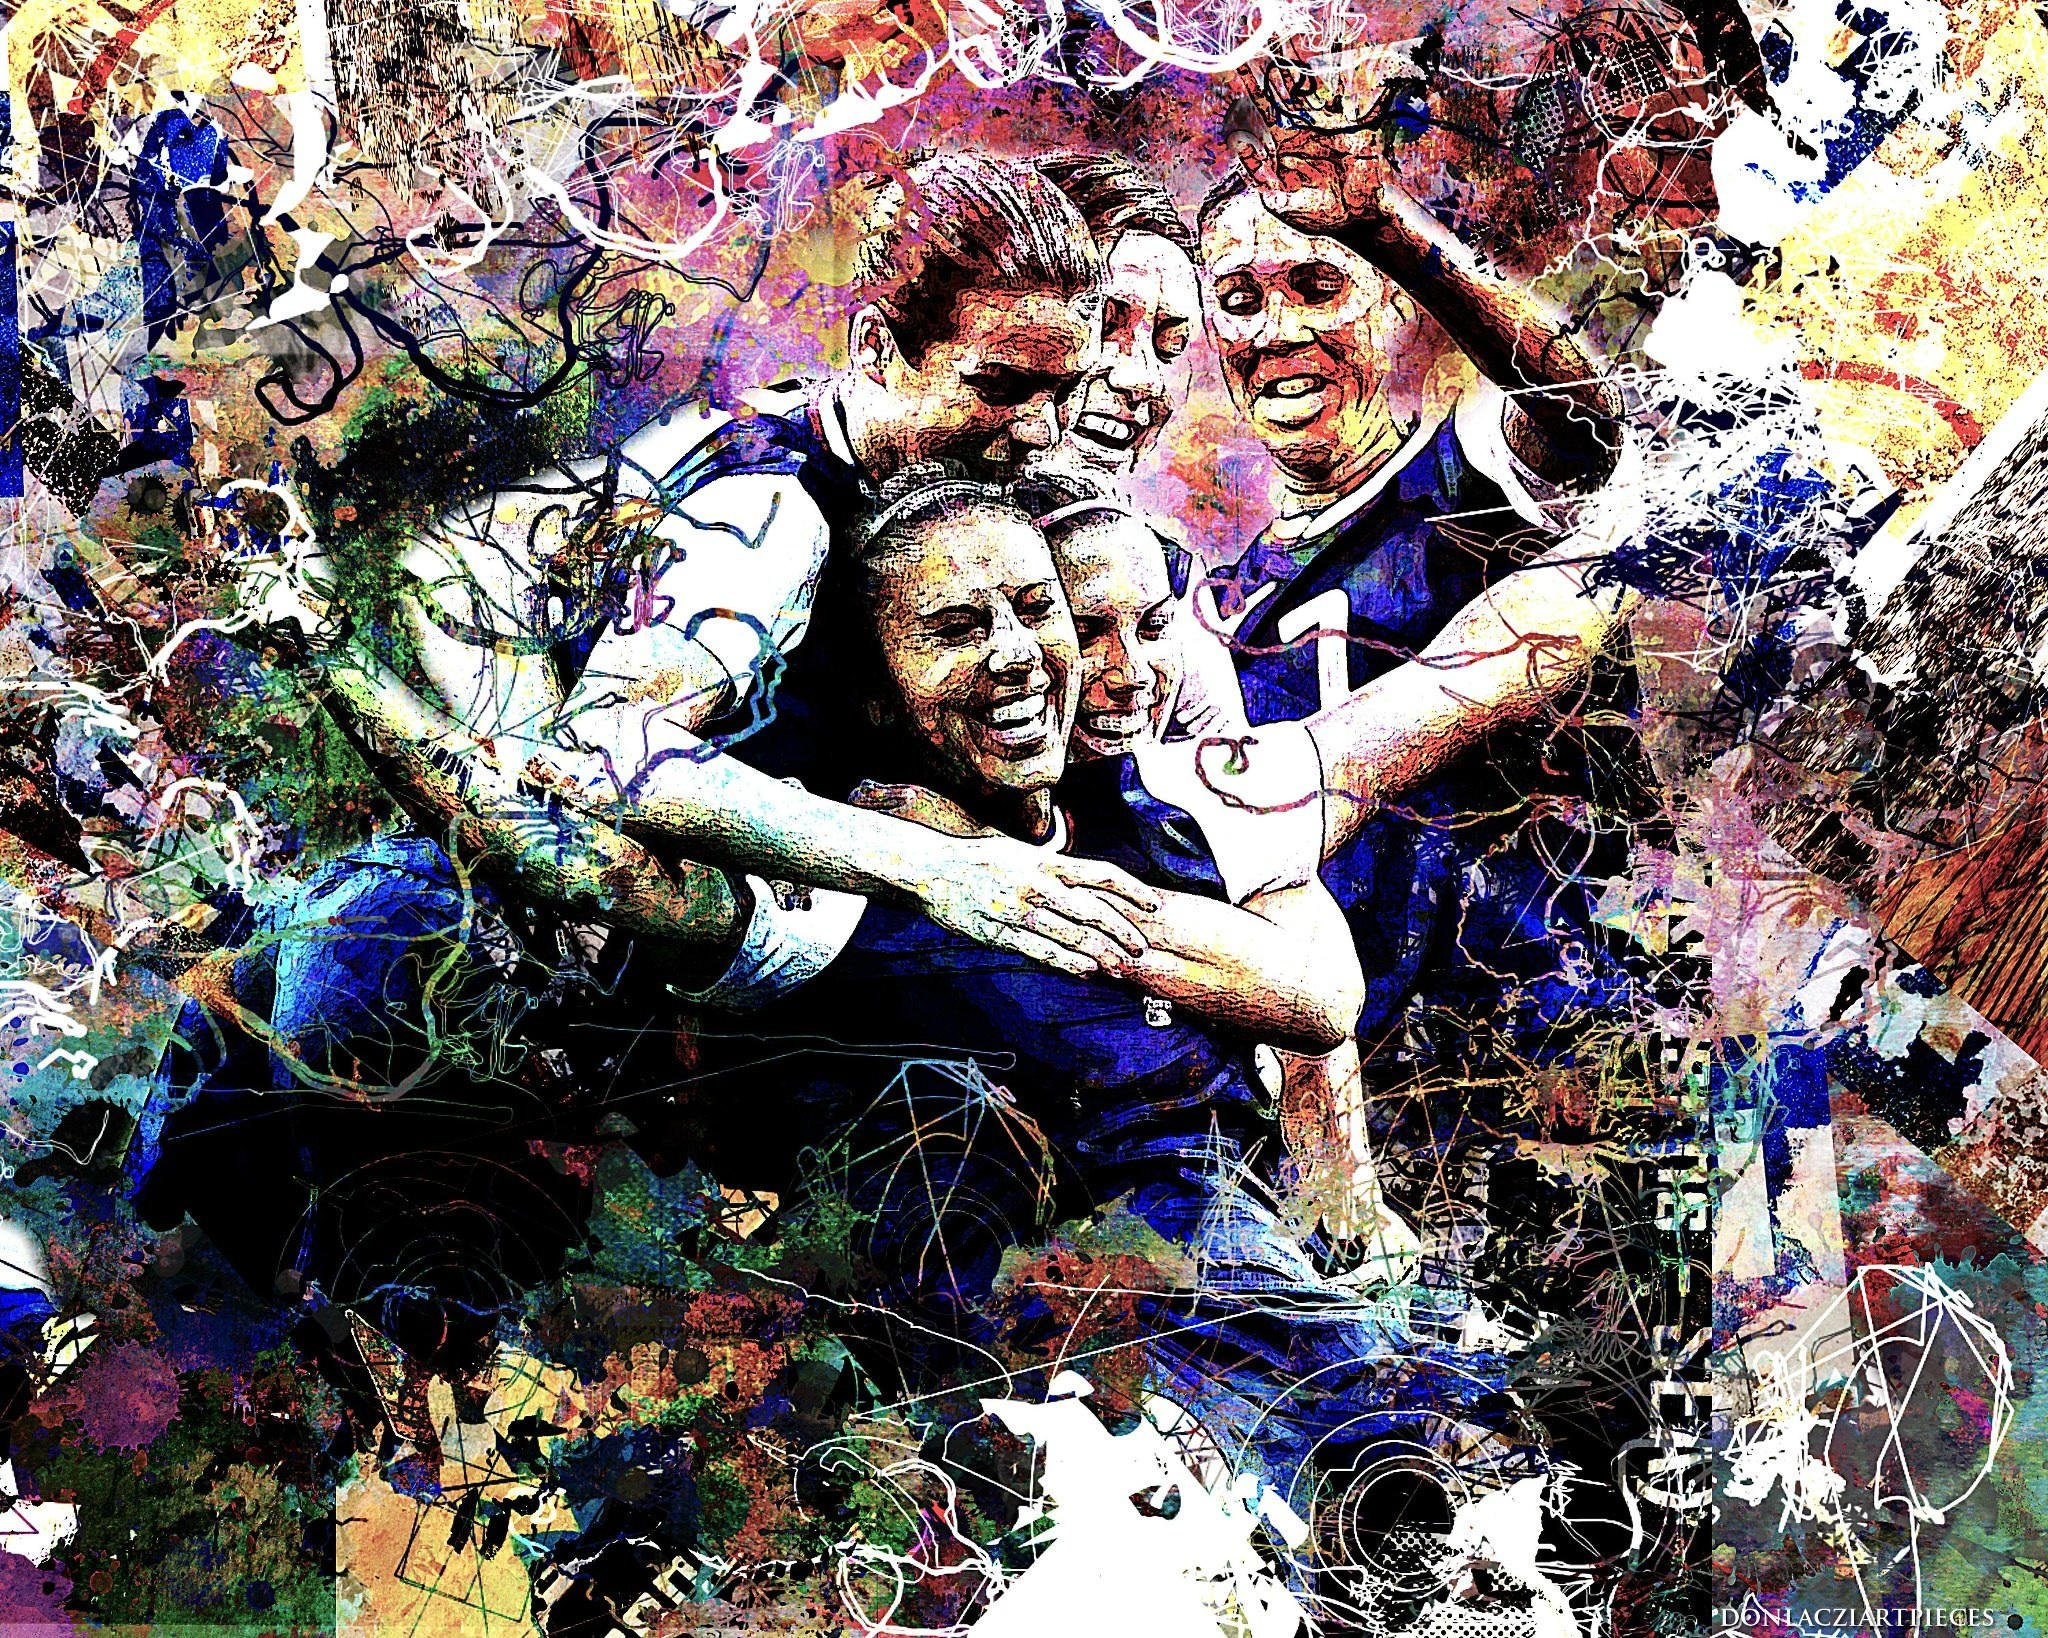 Carli Lloyd - “ another great #USWNT graphic